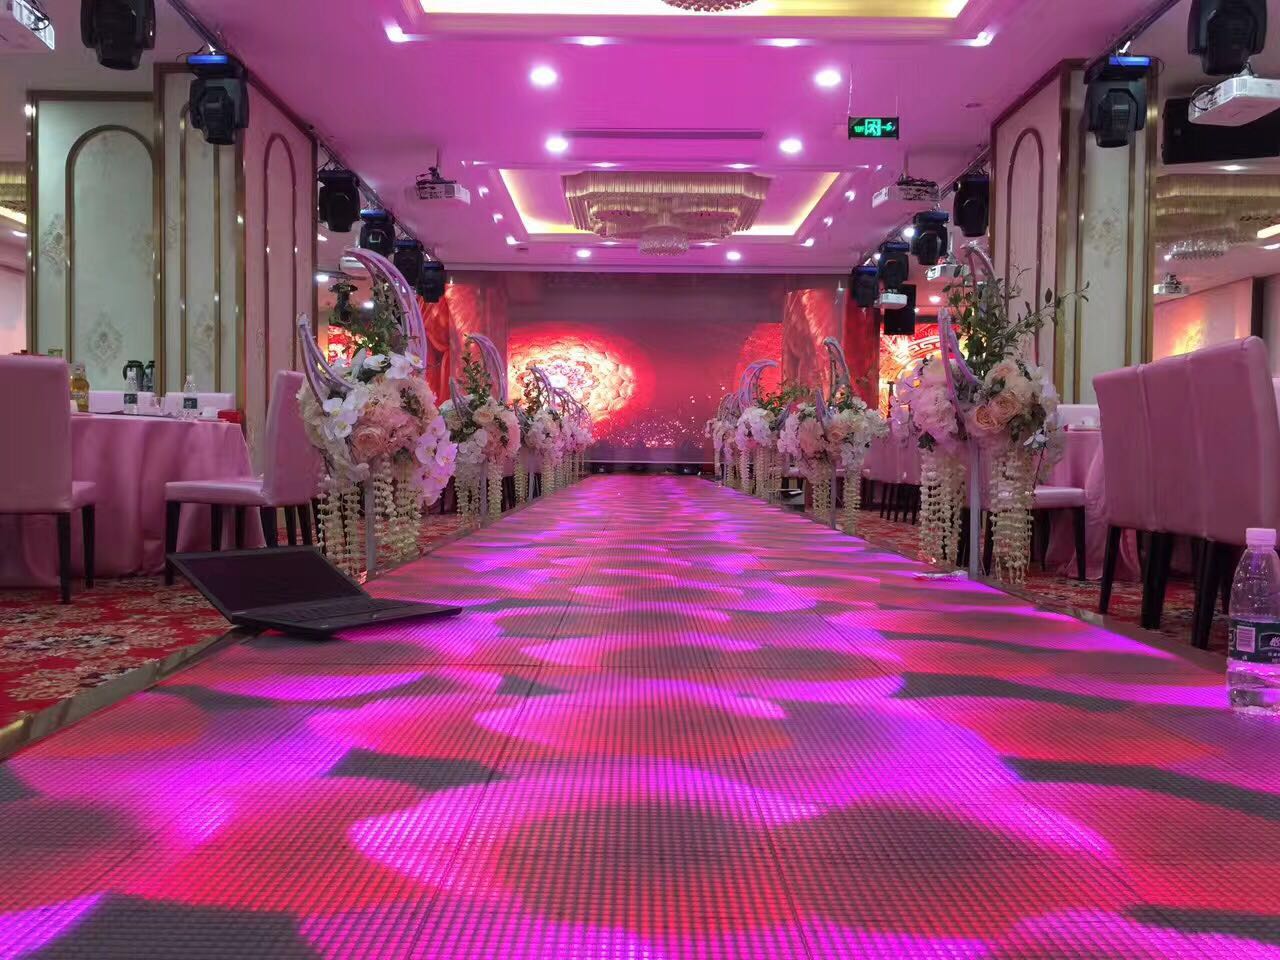 XYG LED floor screen shows you a different red carpet show